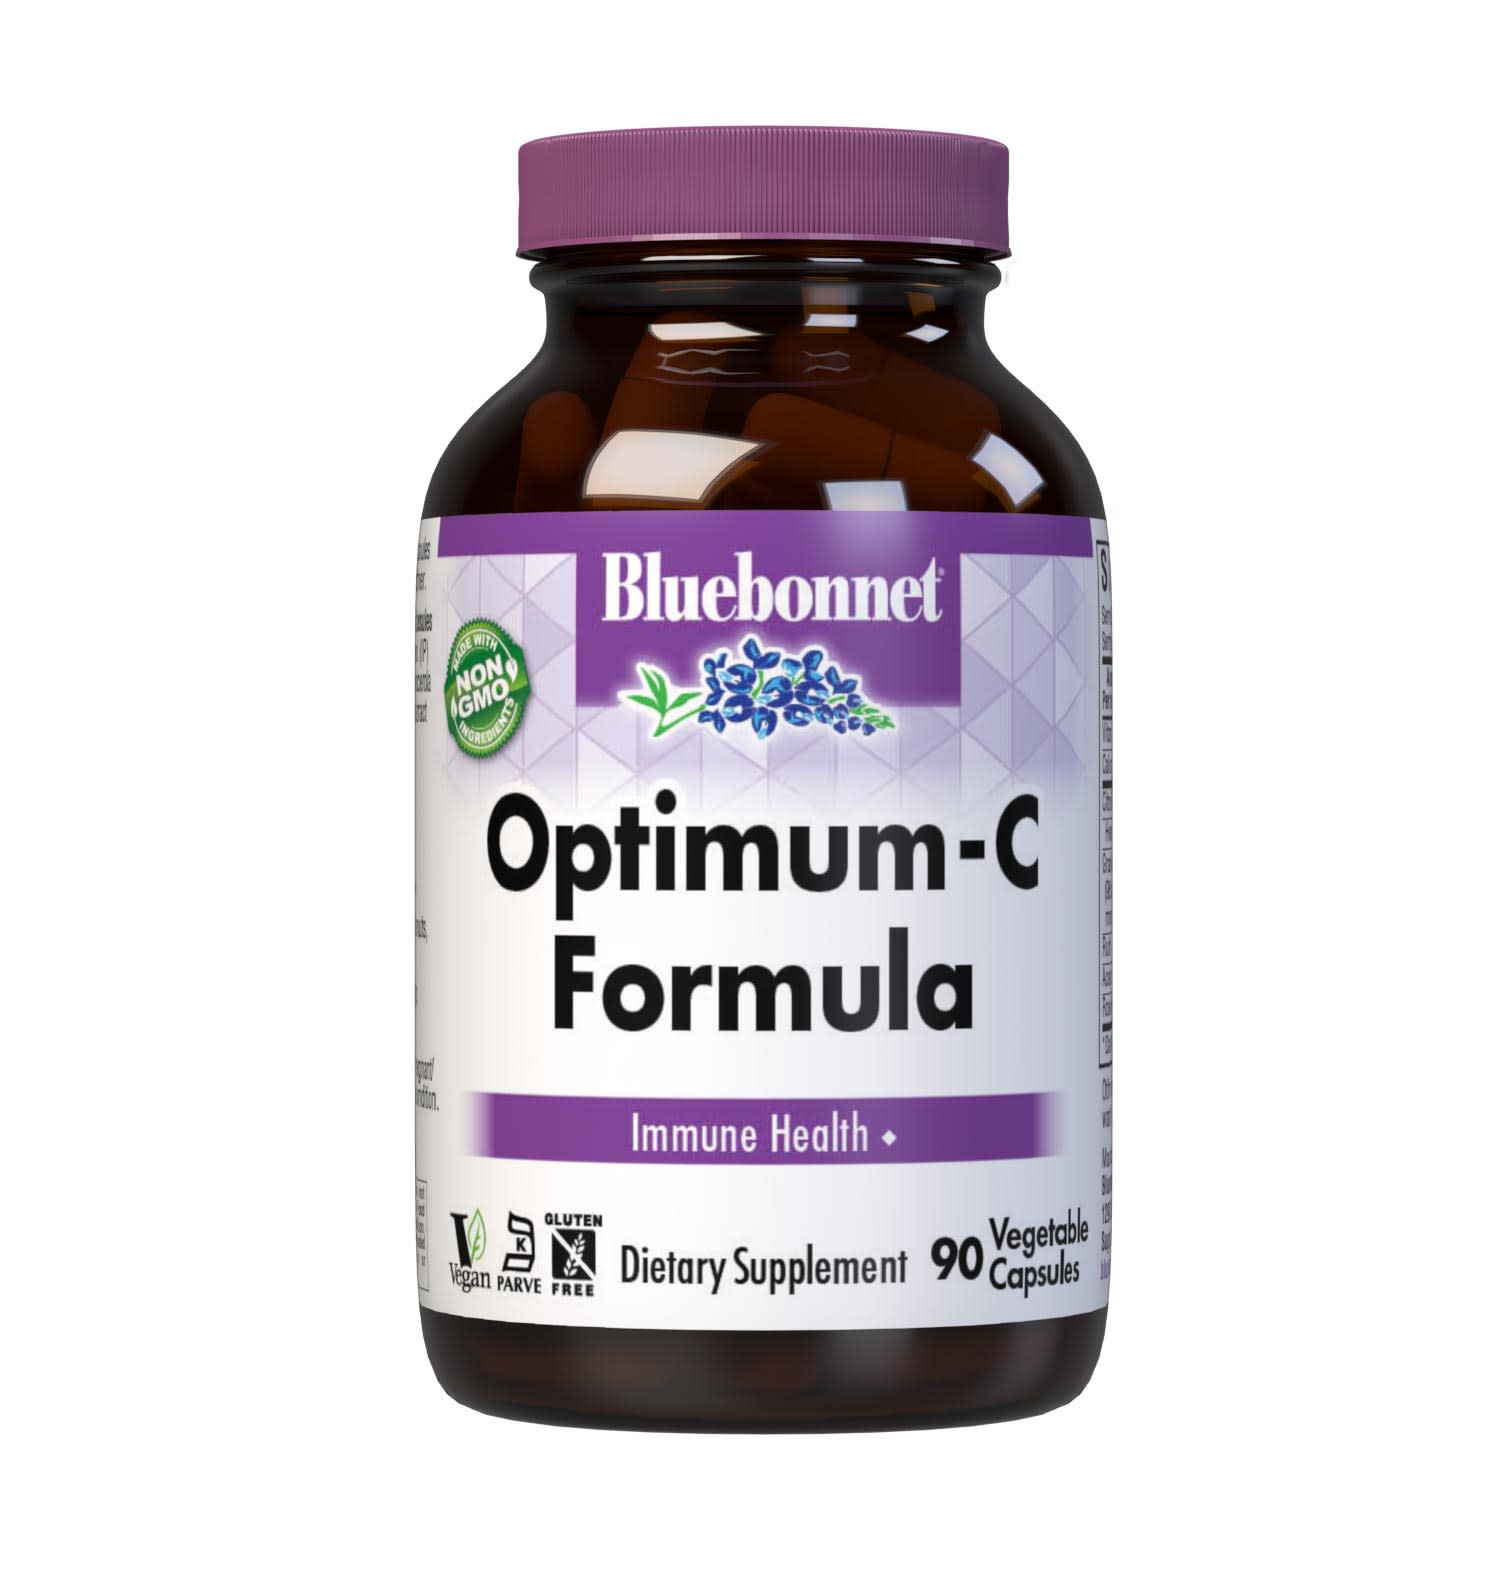 Bluebonnet’s Optimum-C Formula 90 Vegetable Capsules are formulated with non-GMO, identity preserved (IP) vitamin C from calcium ascorbate, rose hips and acerola along with citrus bioflavonoids and grape seed extract to help support immune function. #size_90 count